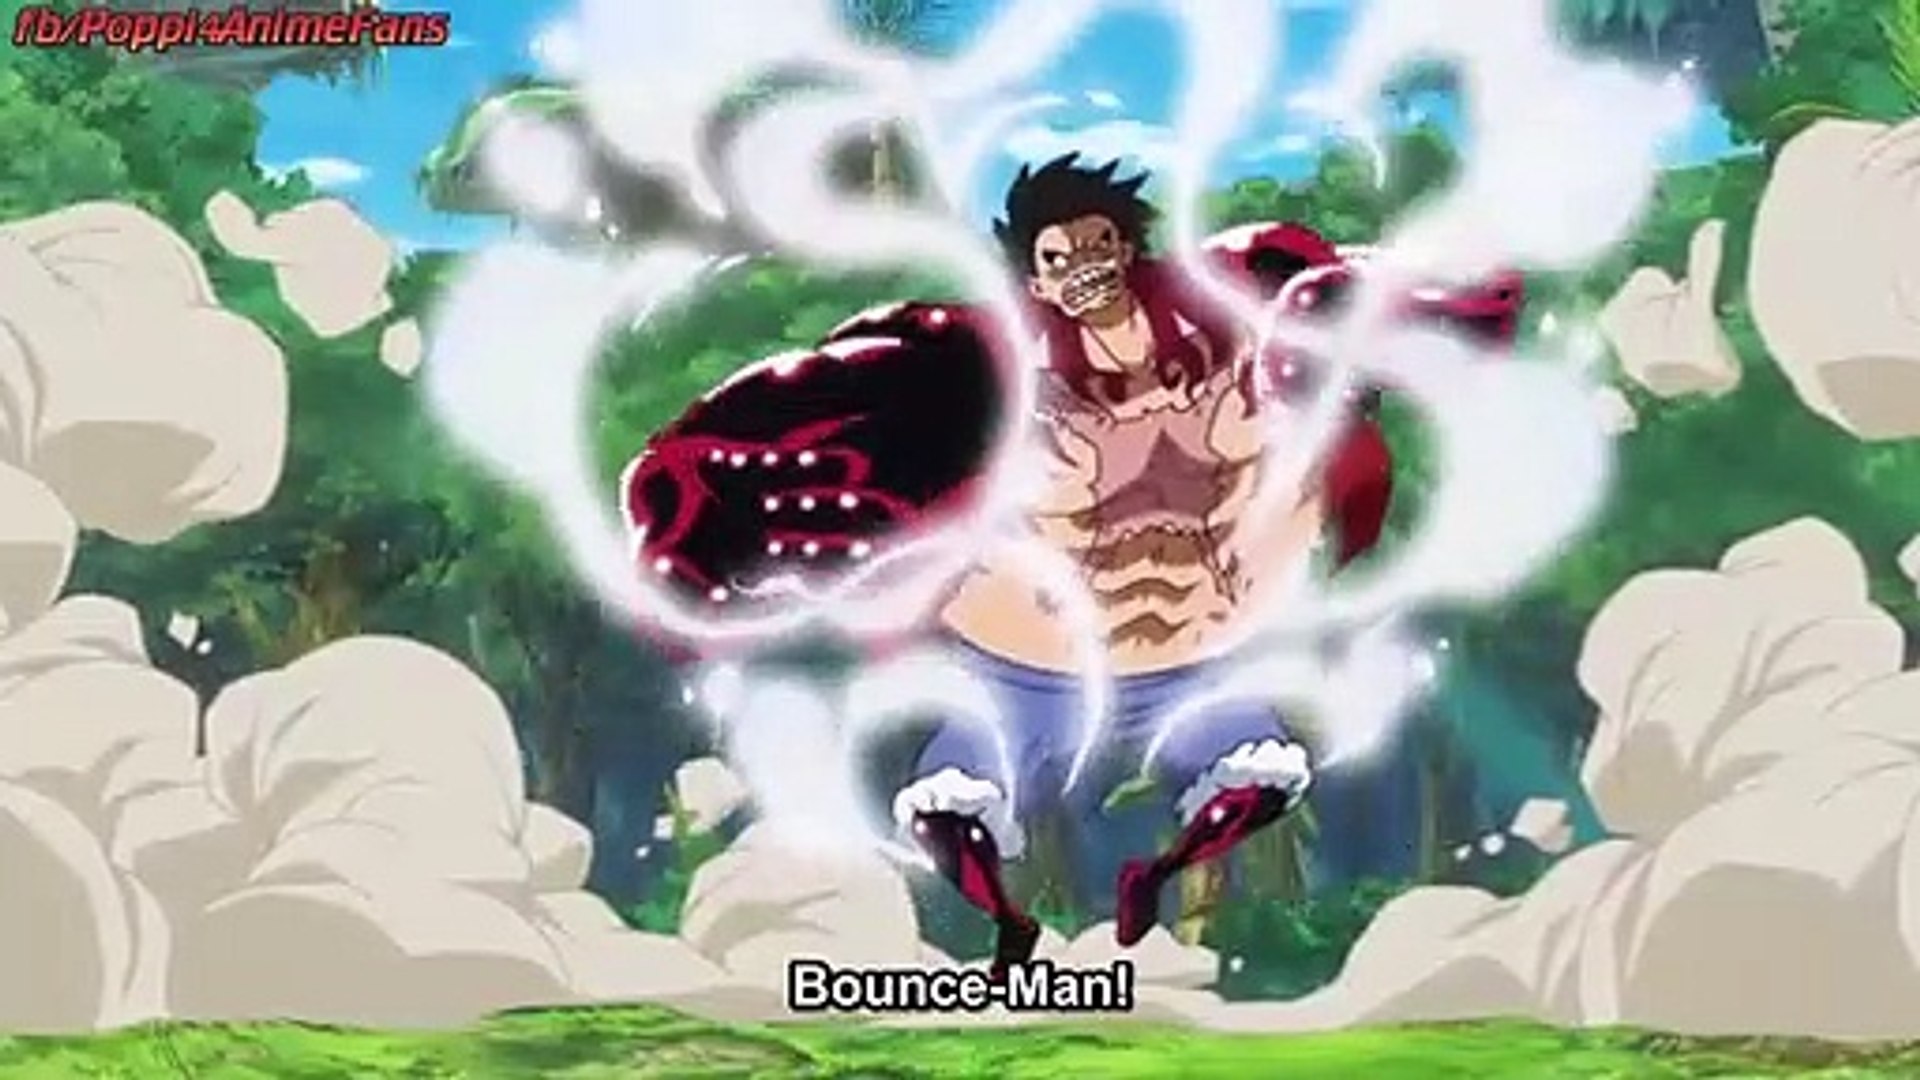 Luffy Shows His Gear 4 To Rayleigh Rayleigh Vs Gear 4 Luffy Luffy S Training One Piece Ep 870 Video Dailymotion